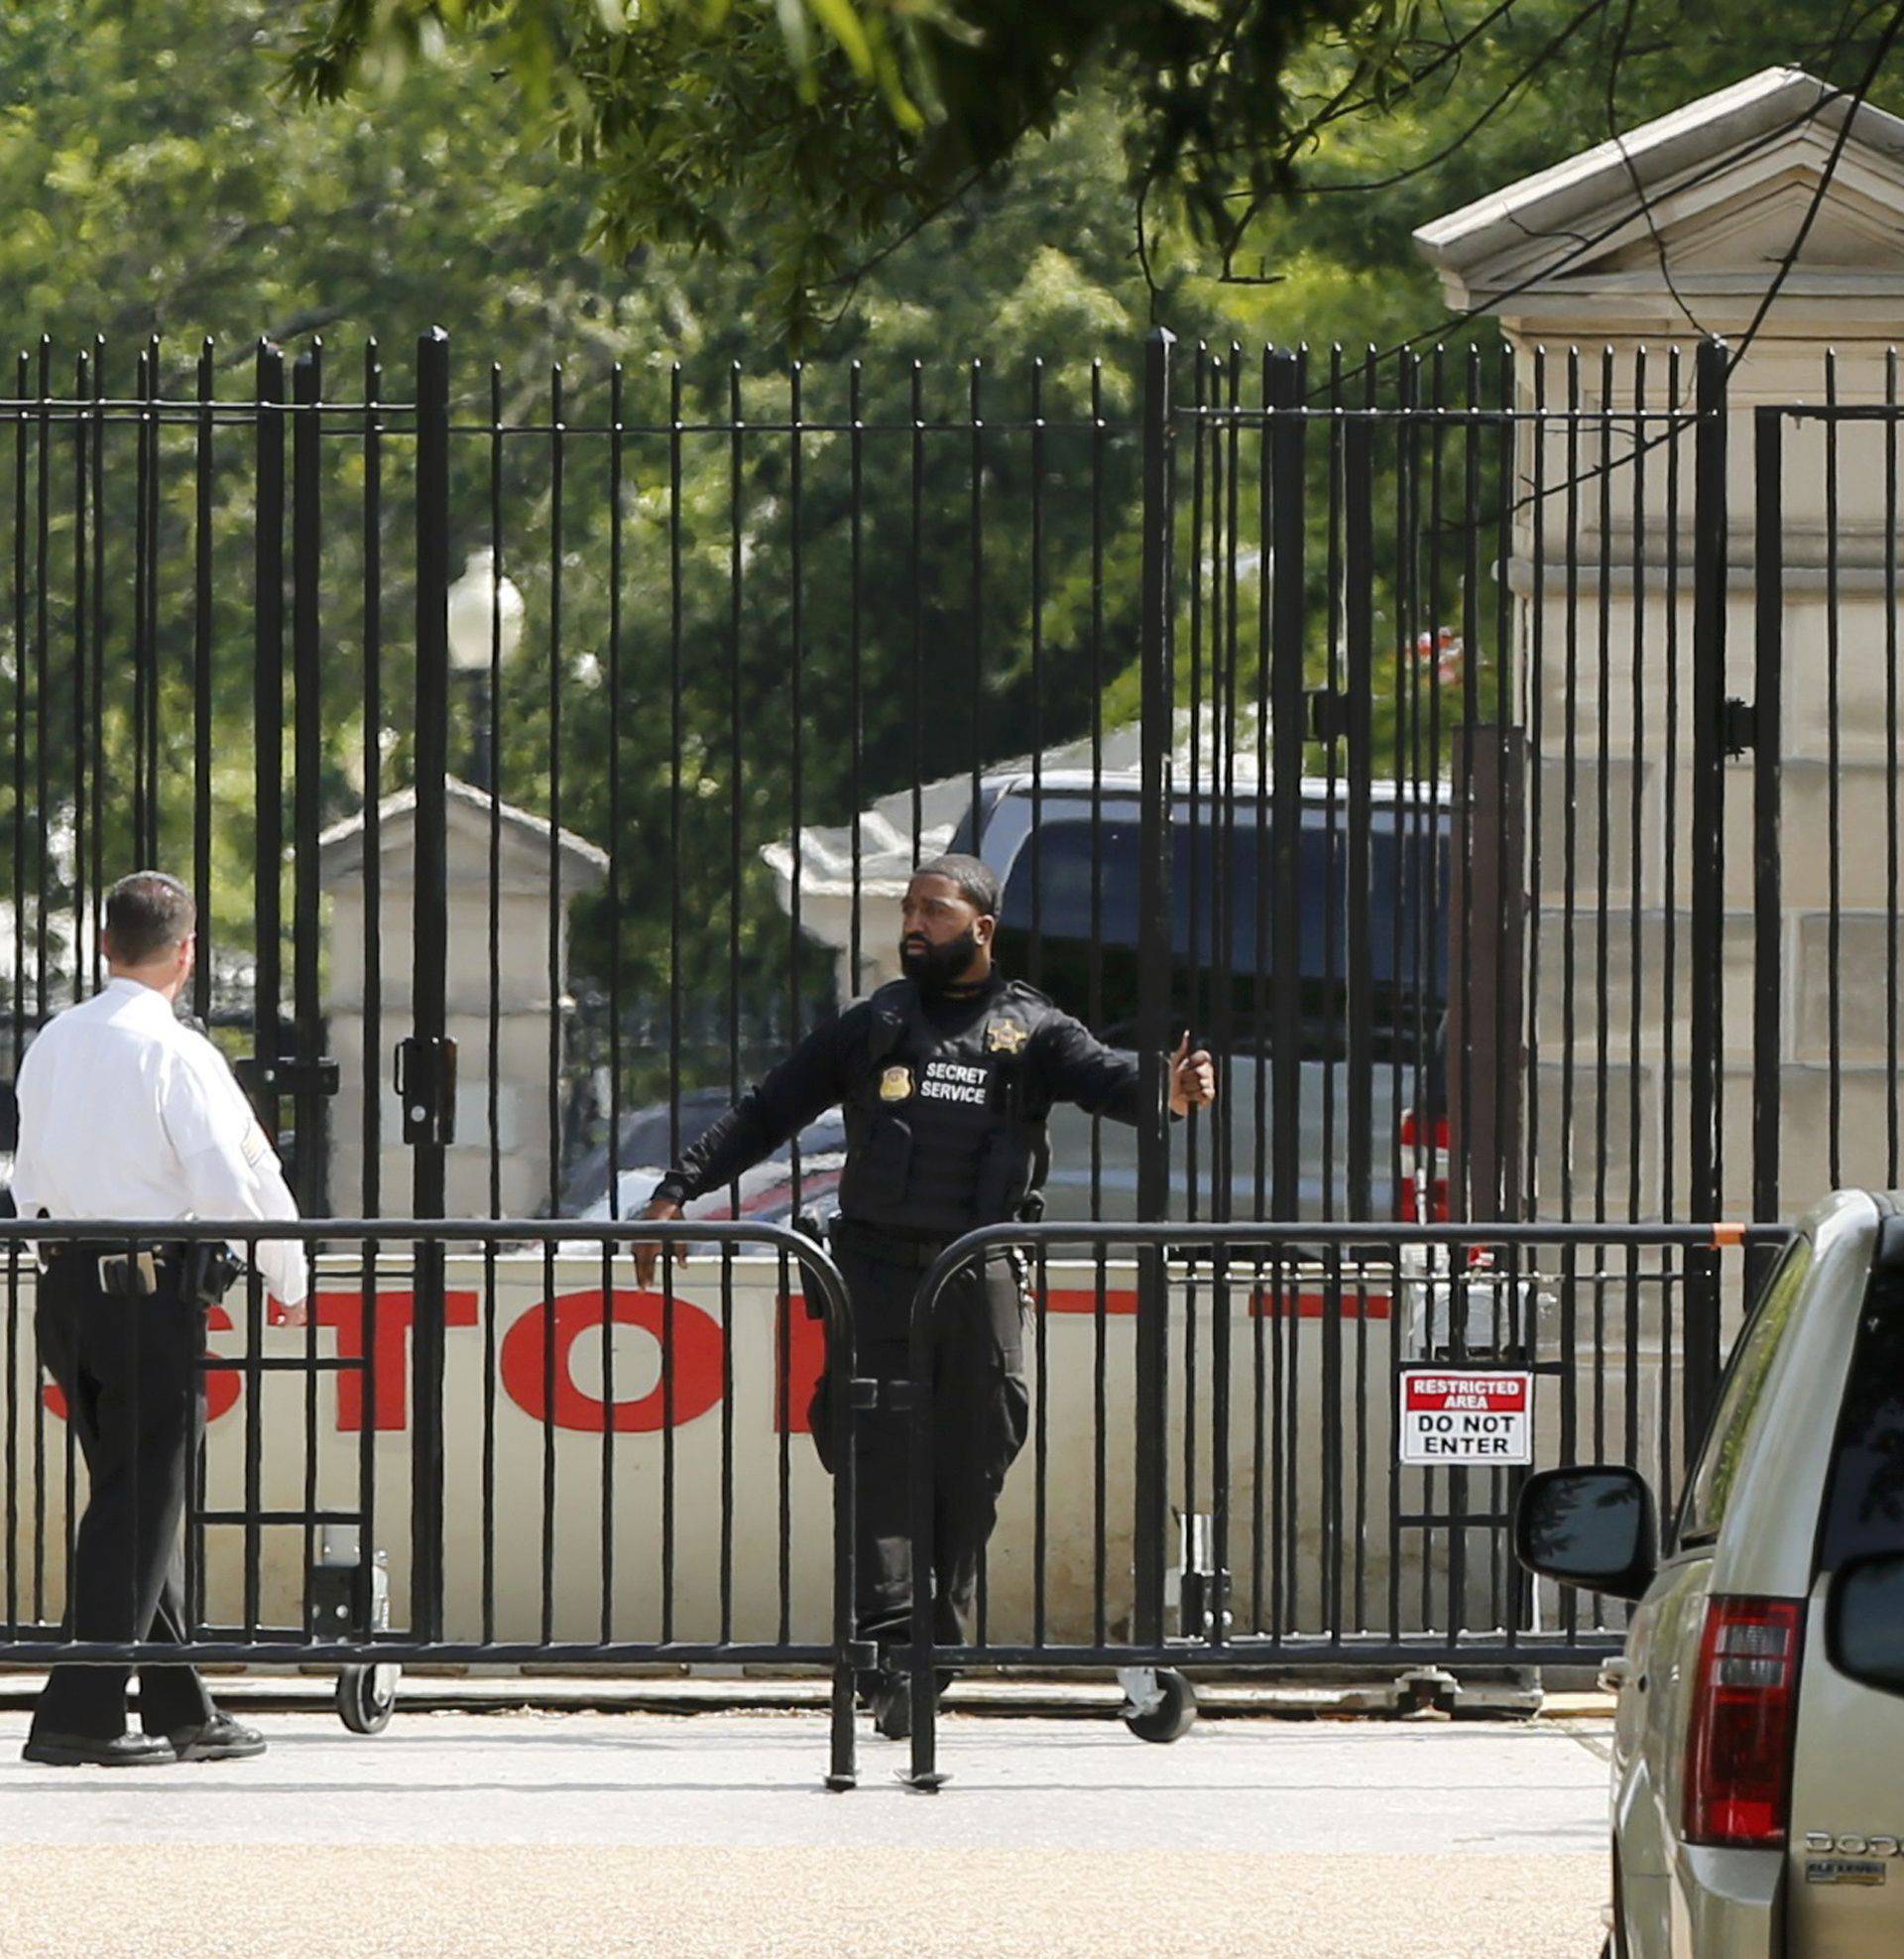 Police secure a location after a shooting near the White House in Washington DC